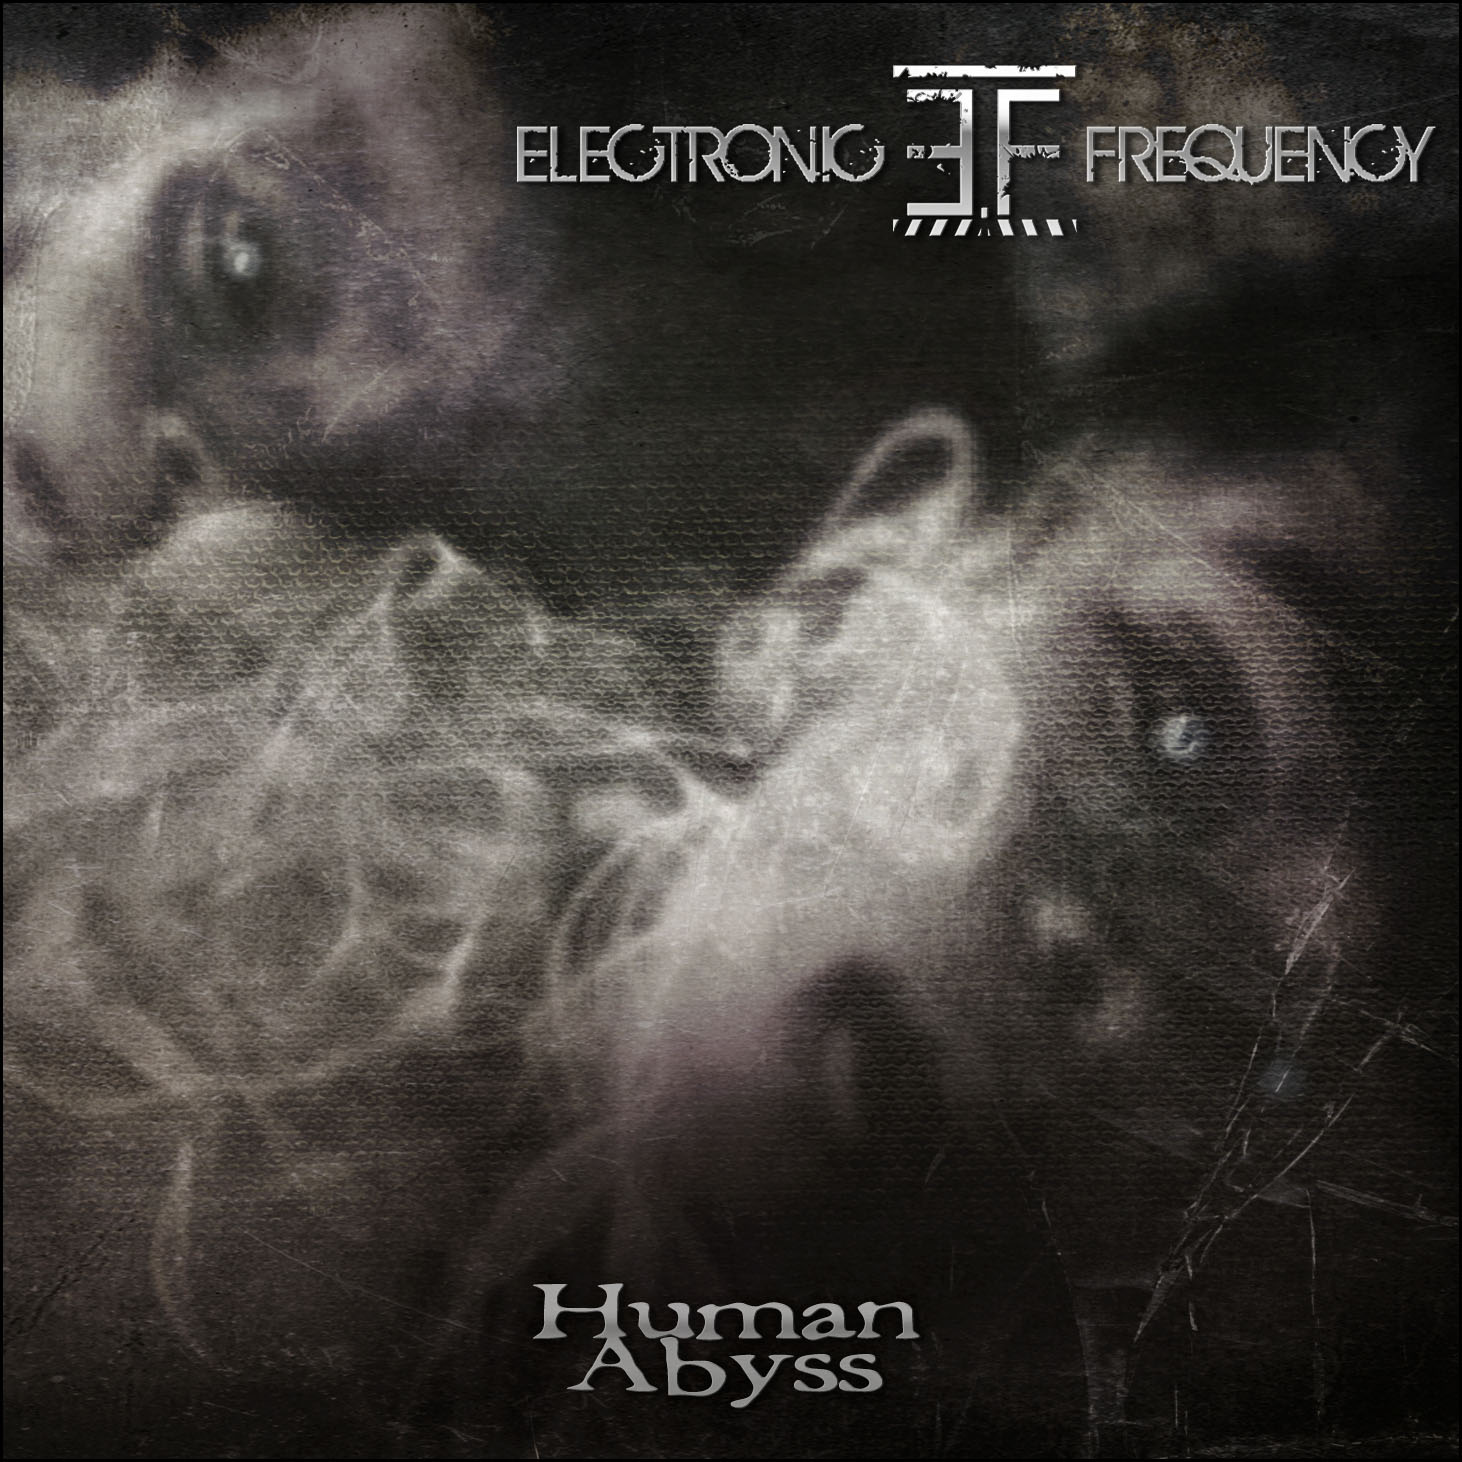 Electronic Frequency - Human Abyss (2016) Album Info